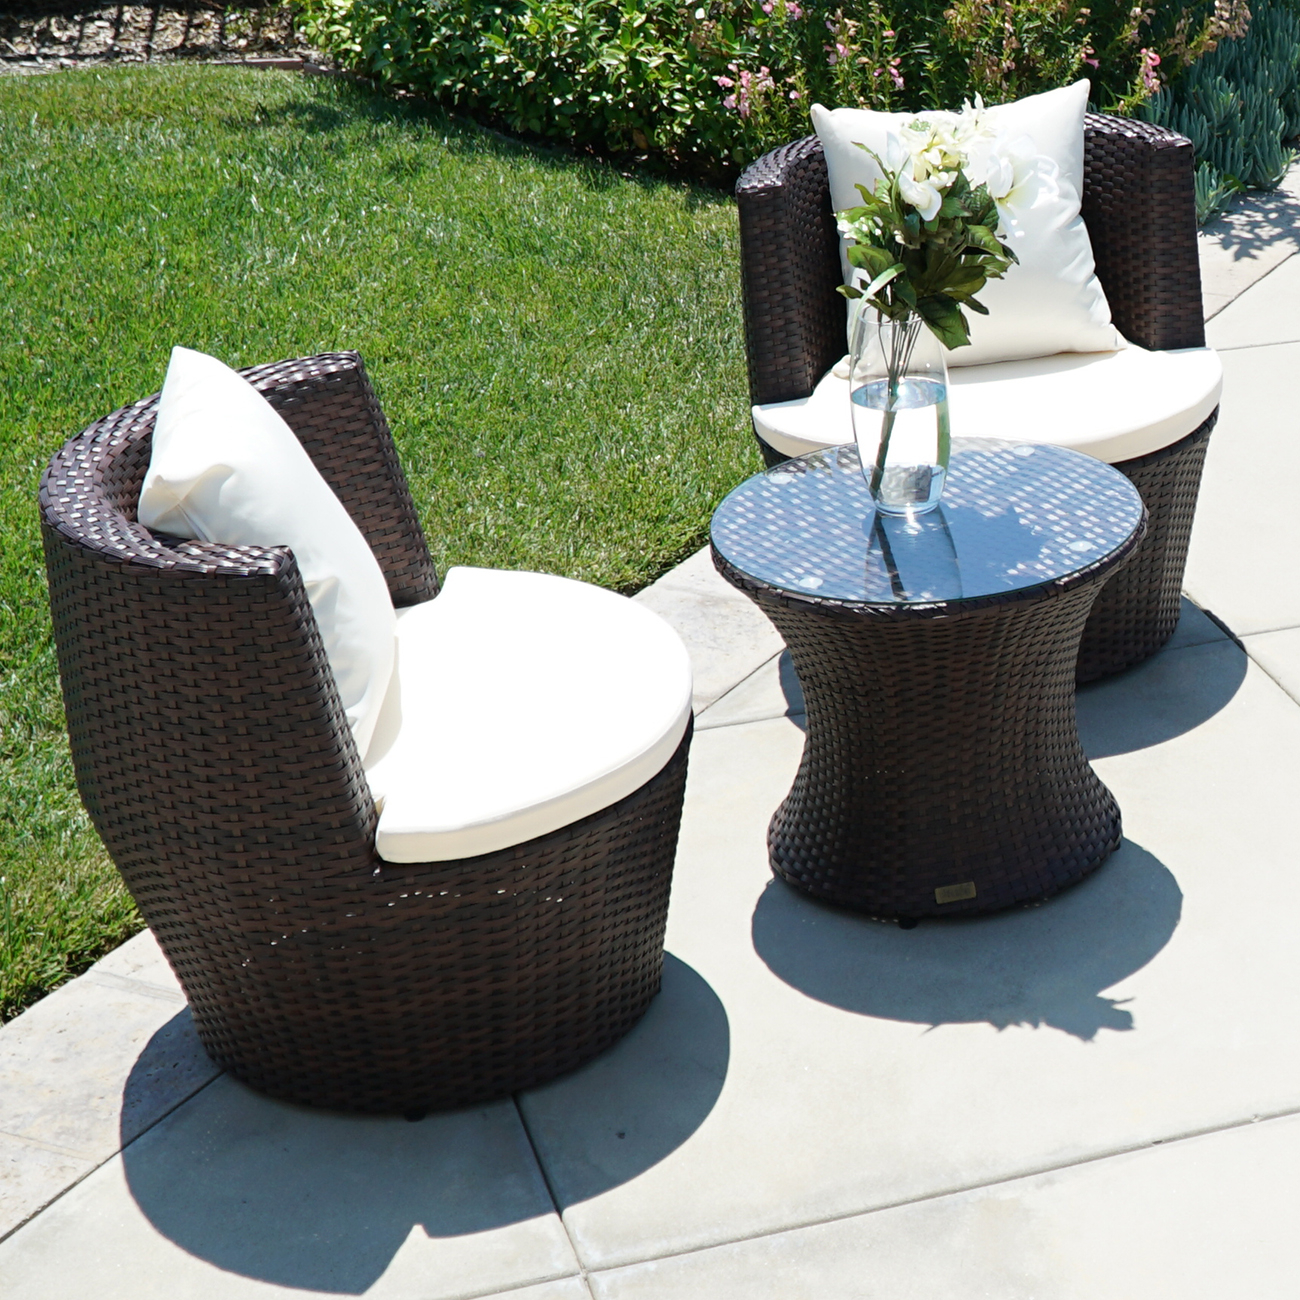 Details About 3 Pc Patio Outdoor Rattan Set Wicker Furniture Glass Table Brown Round Chairs pertaining to measurements 1300 X 1300